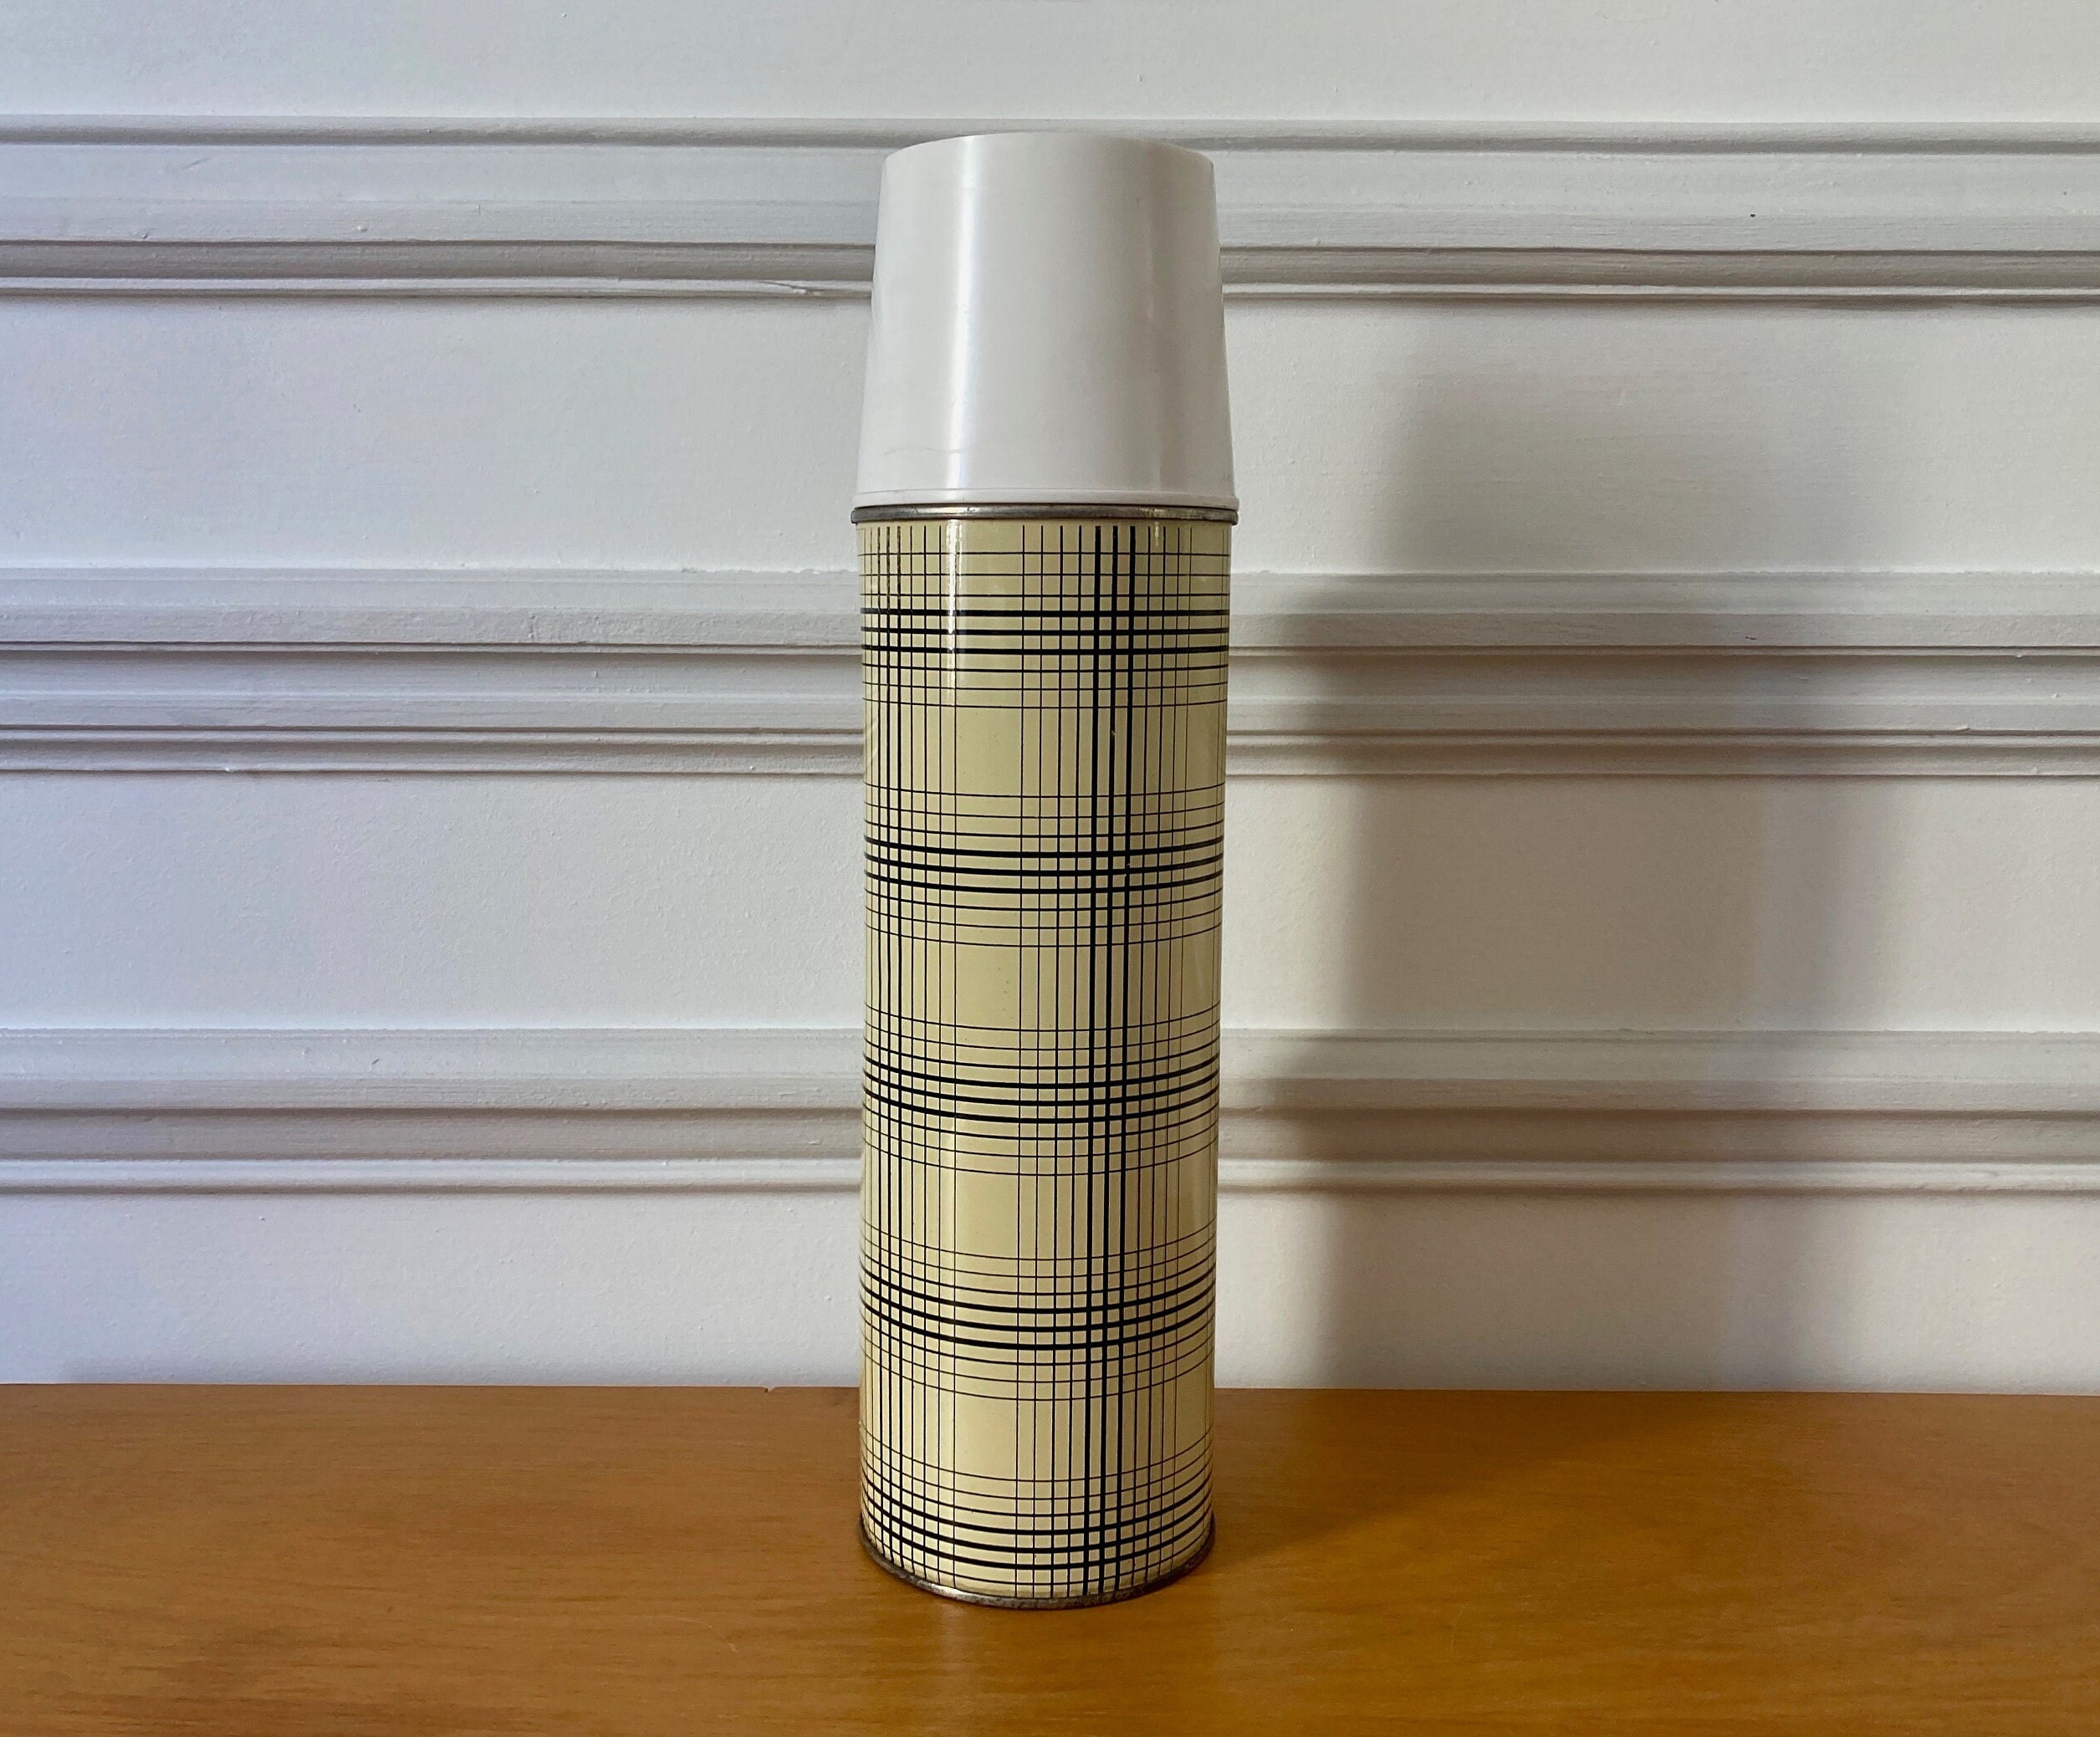 Vintage French Original THERMOS Flask / Early to Mid 1900s Small